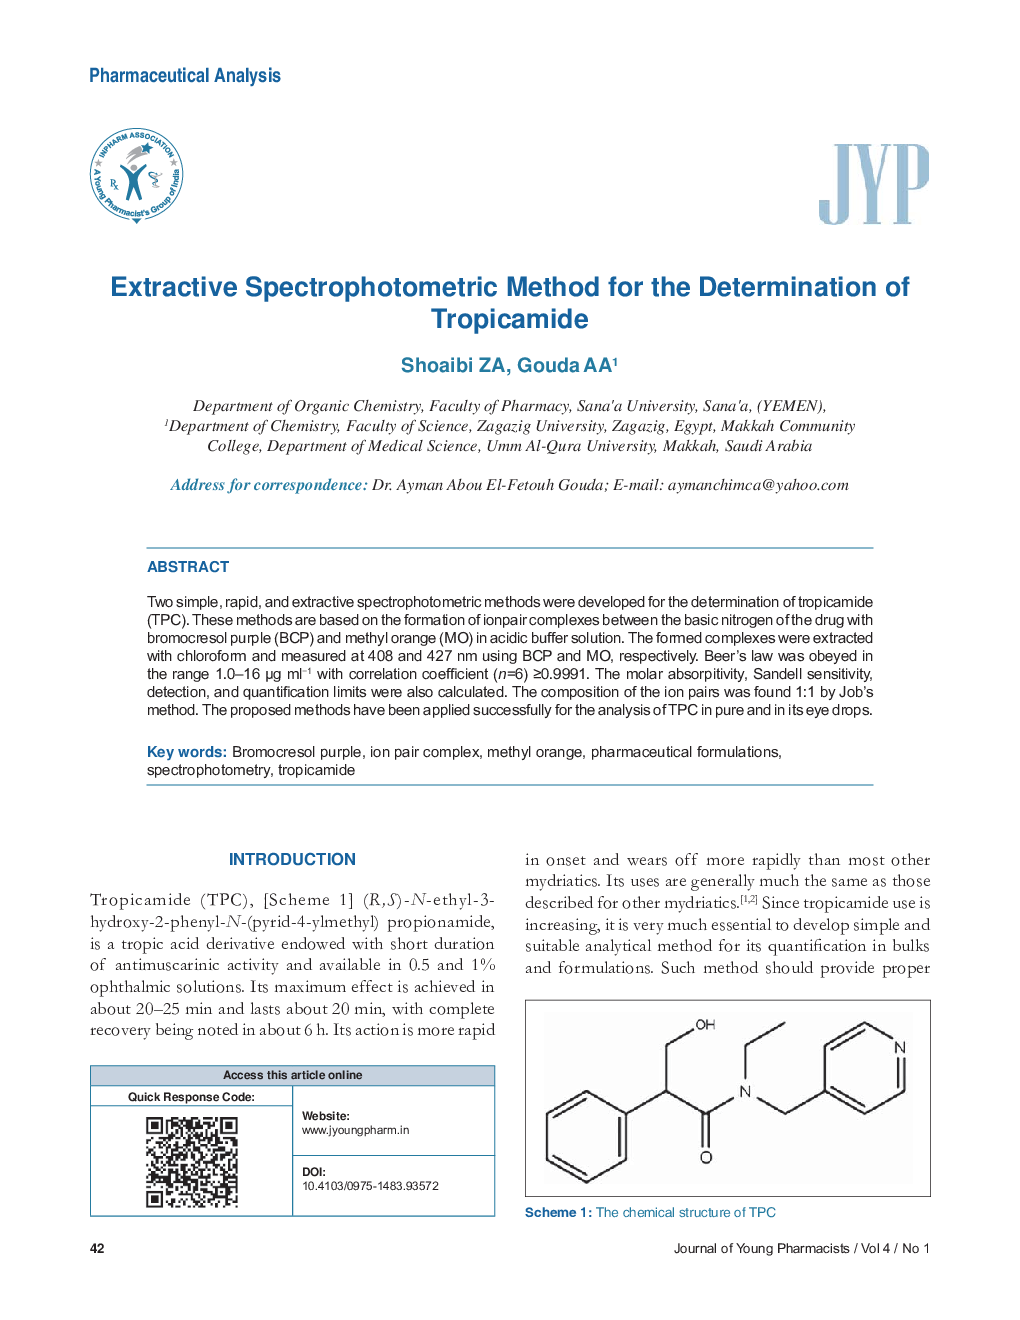 Extractive Spectrophotometric Method for the Determination of Tropicamide